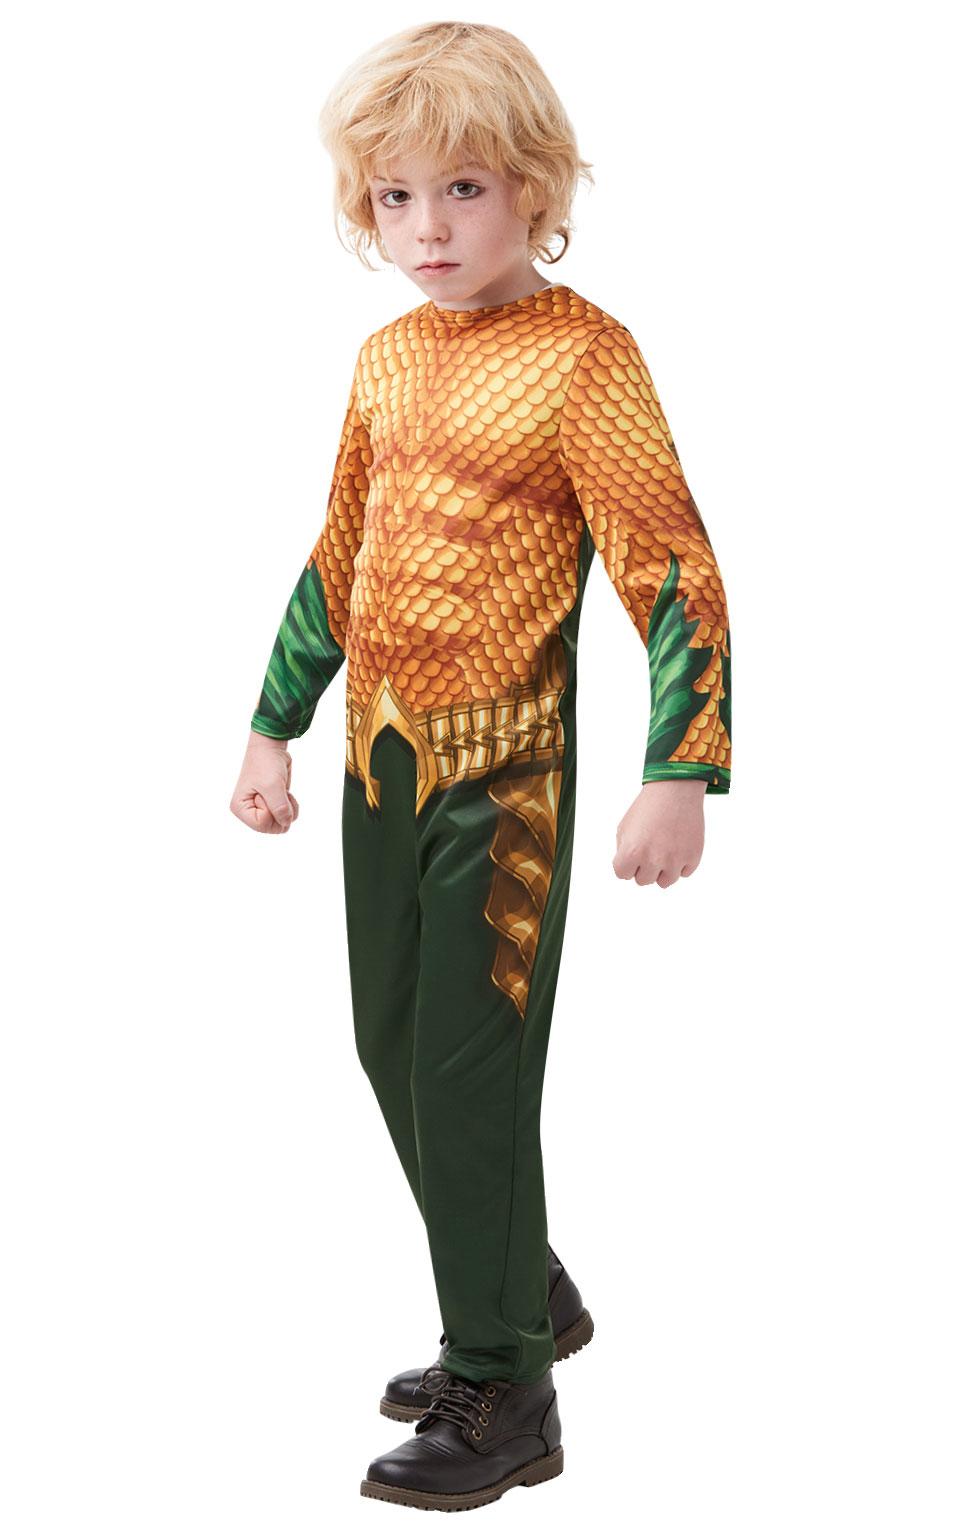 Aquaman Fancy Dress Costume for Kids by Rubies 641328 available here at Karnival Costumes online party shop